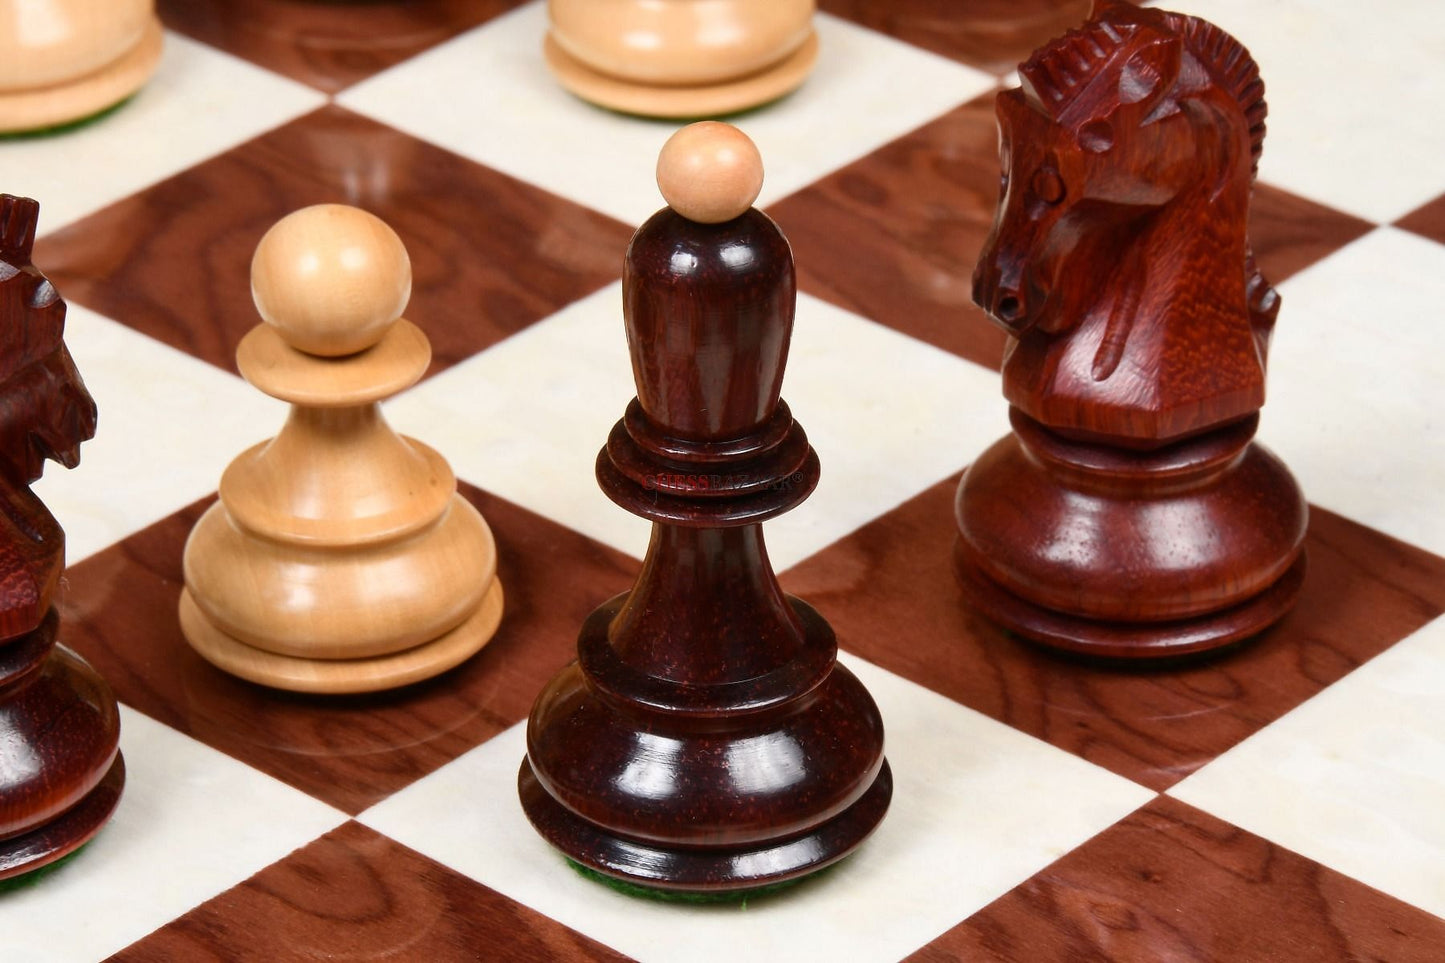 Close up look of Reproduced Dubrovnik Chess Pieces